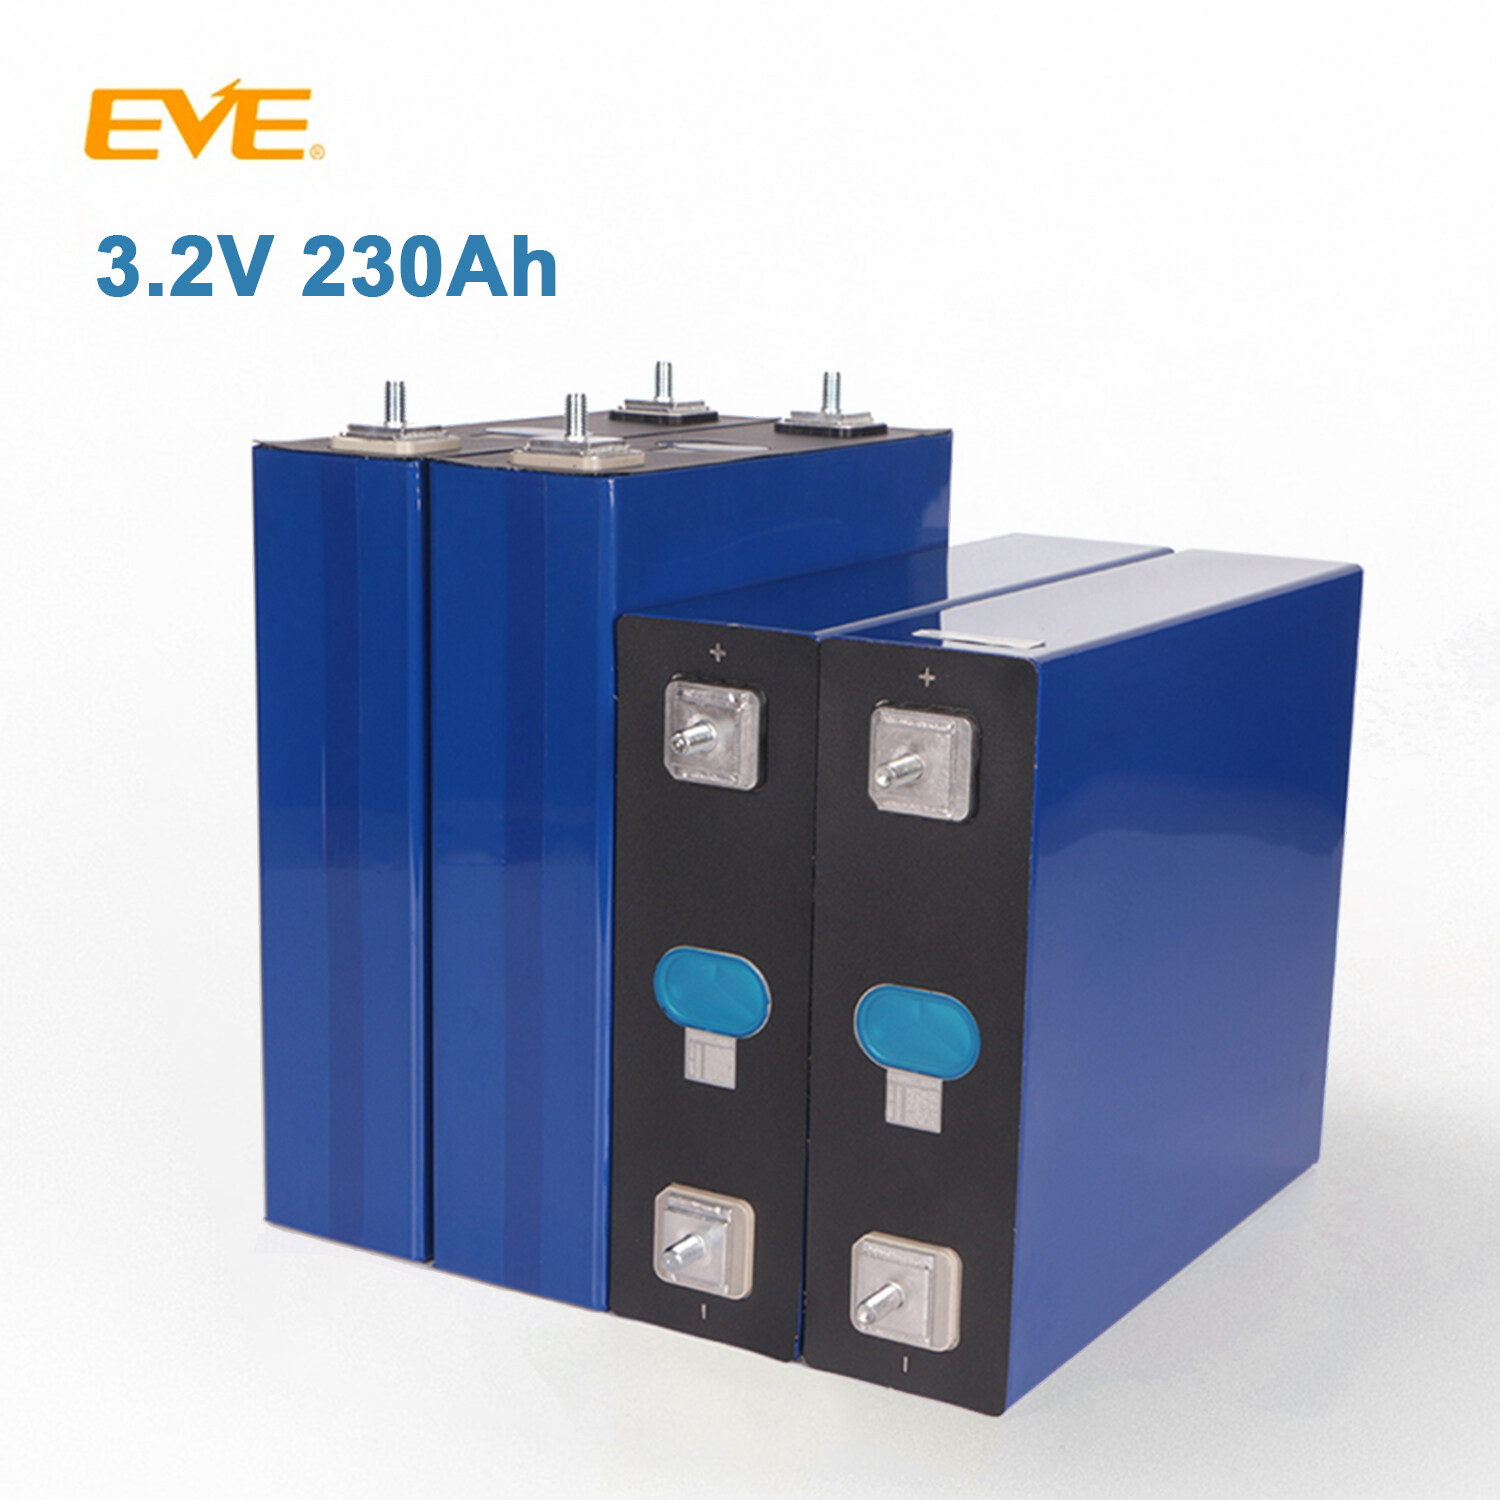 EVE 3.2V 230Ah Rechargeable Prismatic LiFePO4 Battery Cell Brand New